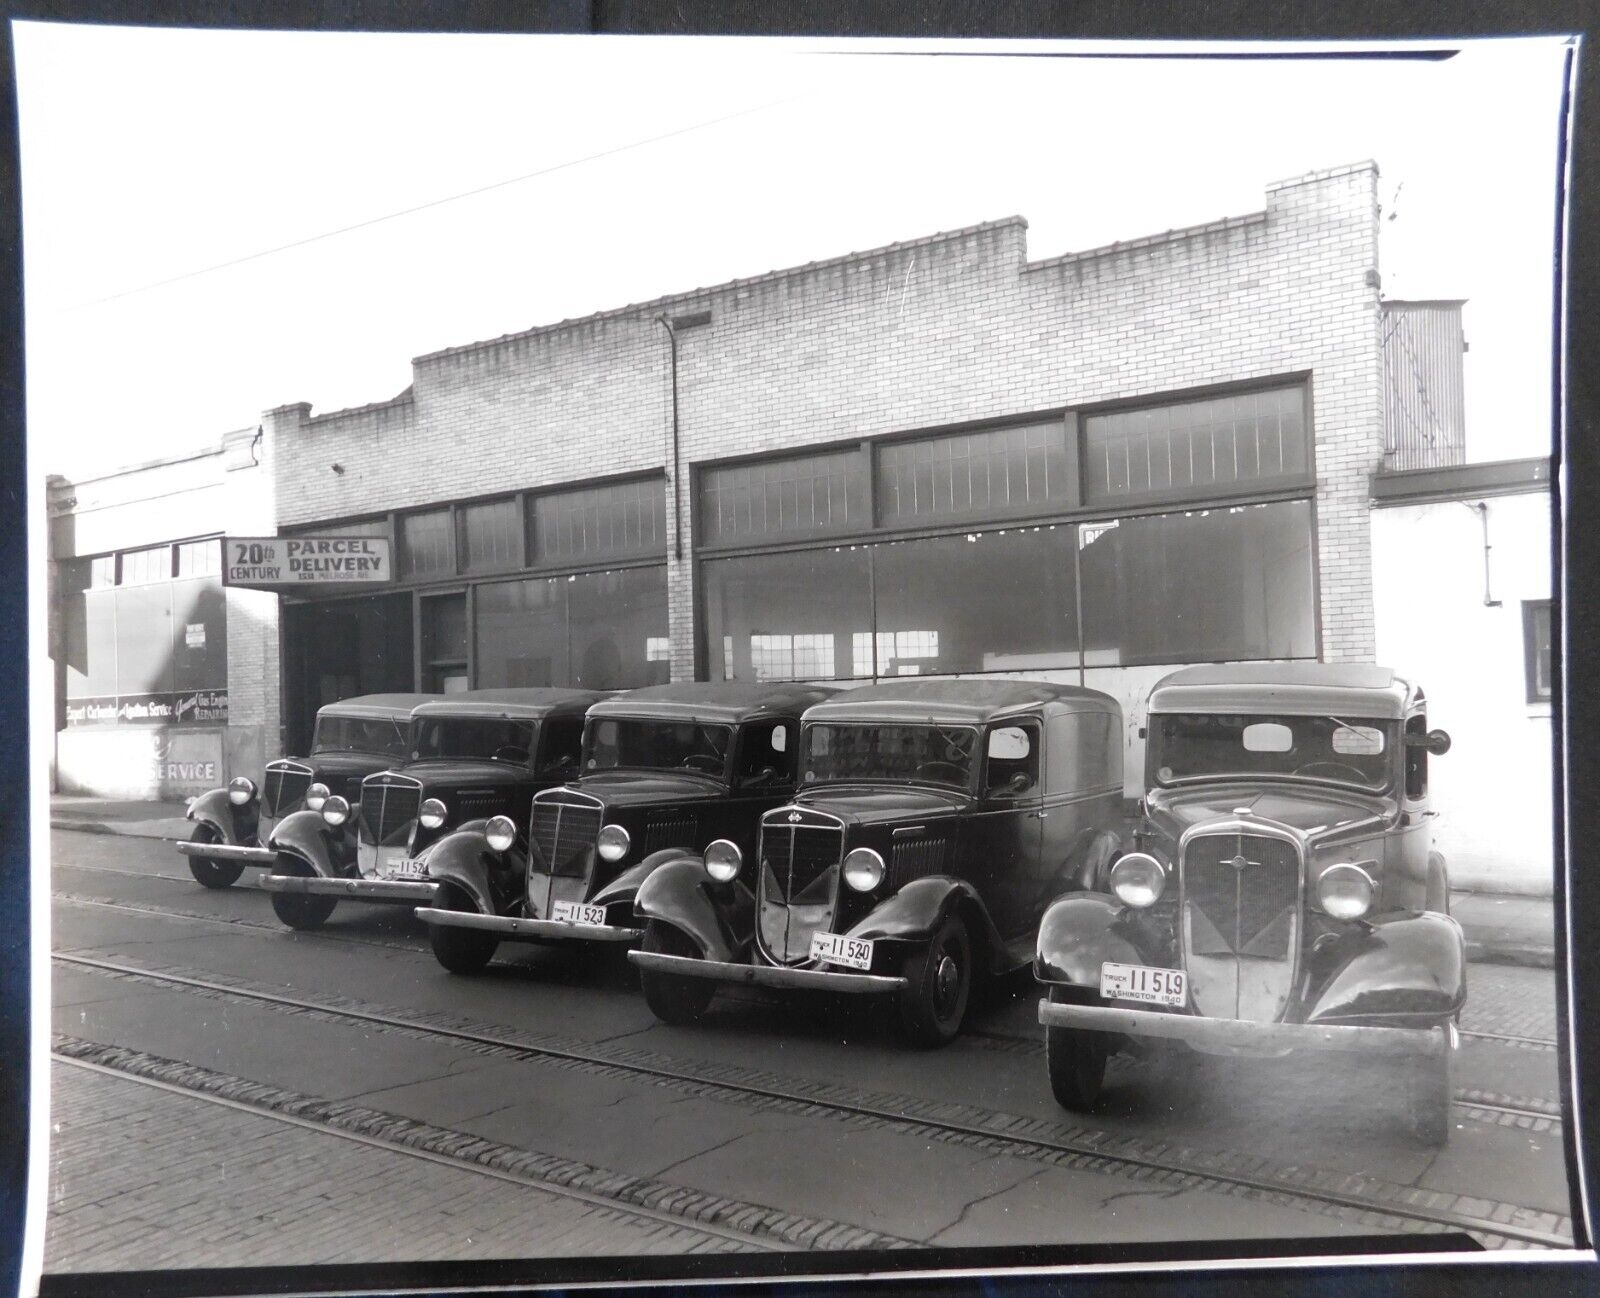 Parcel Delivery Trucks 1930's - 